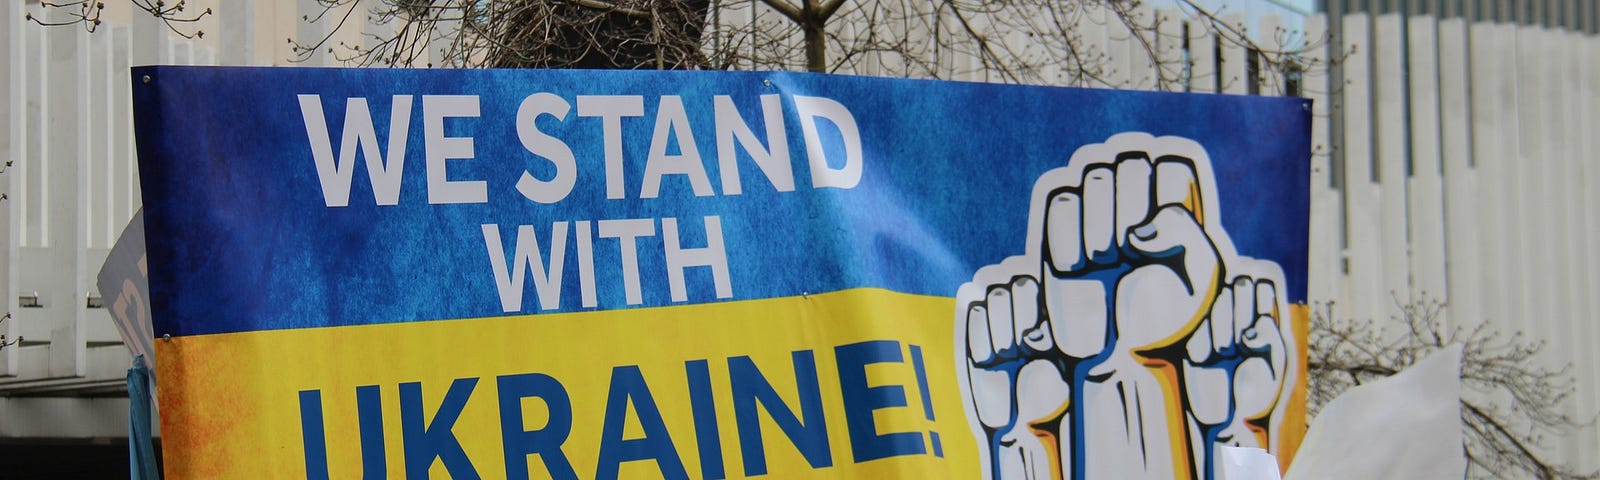 Protestors holding a banner that says “We stand with Ukraine.”